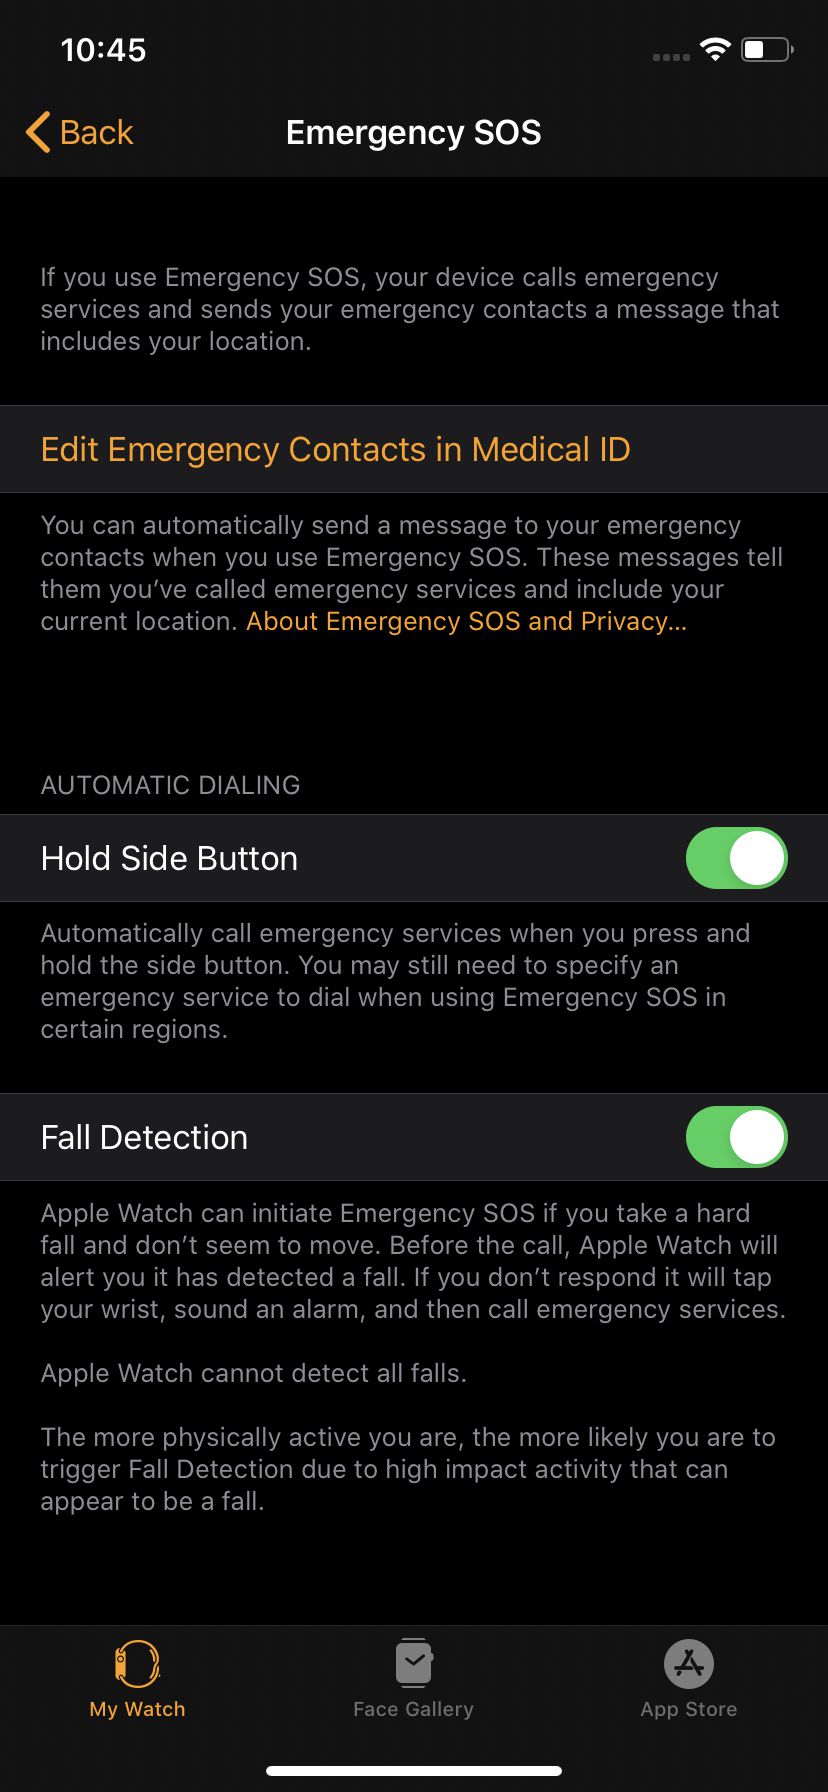 How To Set Up Emergency Sos And Fall Detection On Your Apple Watch